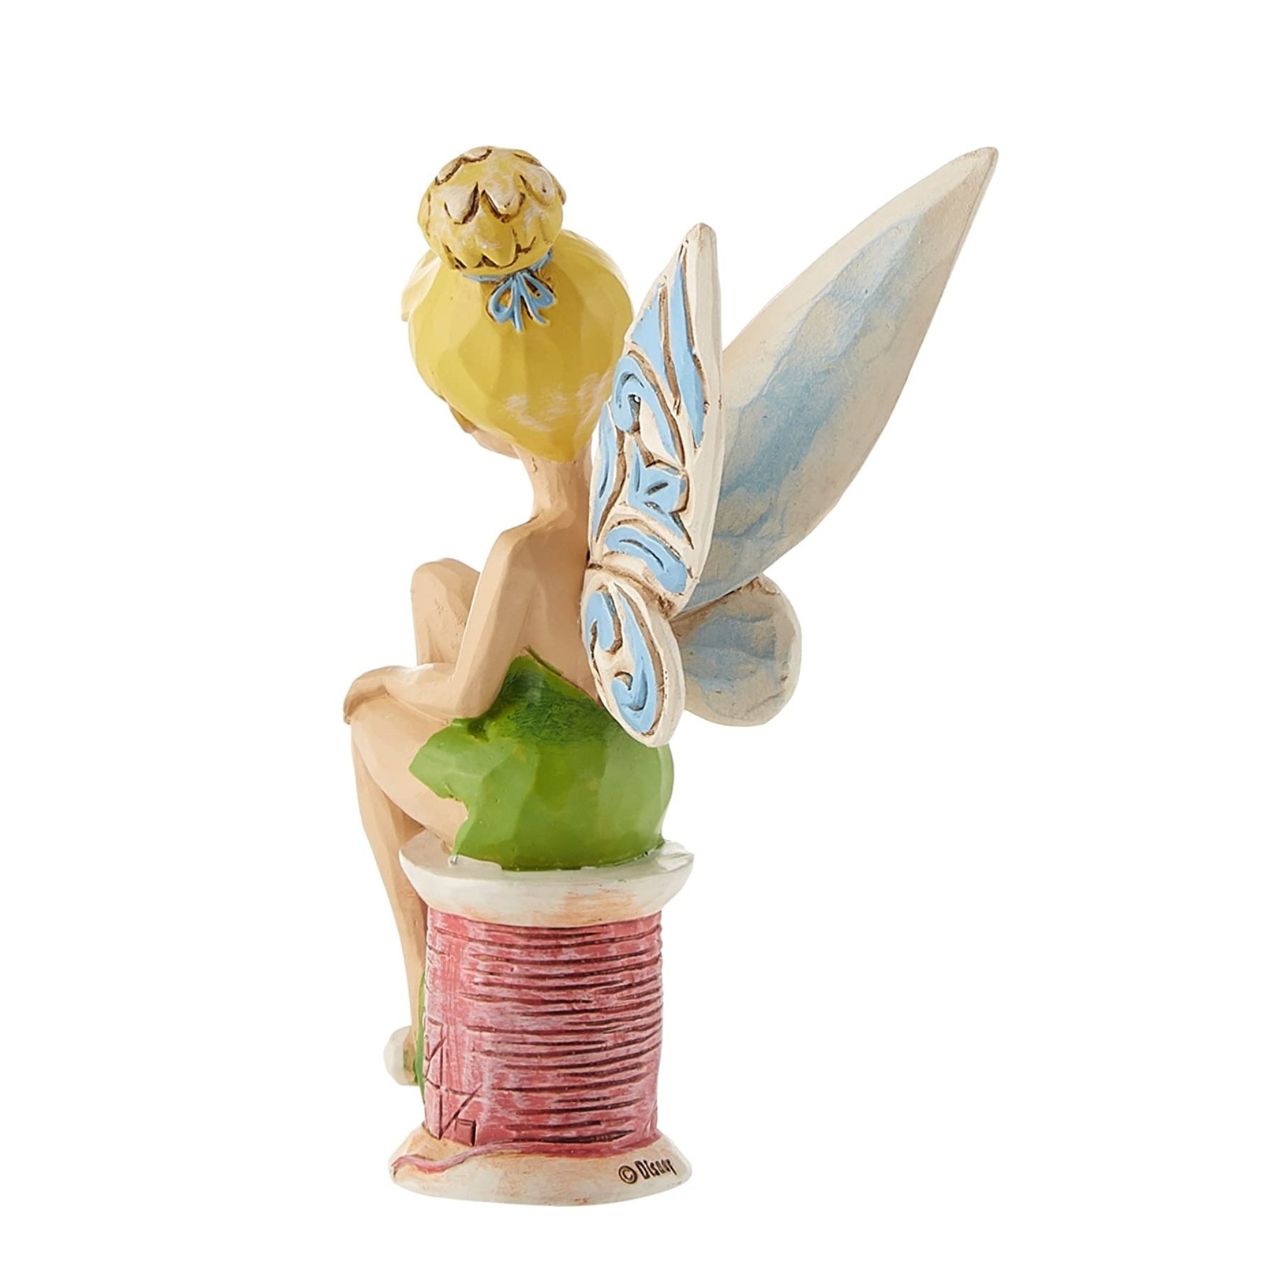 Disney Tinker Bell Crafty Tink Figurine  Tinker Bell takes a rest on a tiny spool of thread. Great for Tink lovers, Jim Shore collectors and sewing enthusiasts alike. A fun and flirty new personality pose from award winning artist and sculptor, Jim Shore.